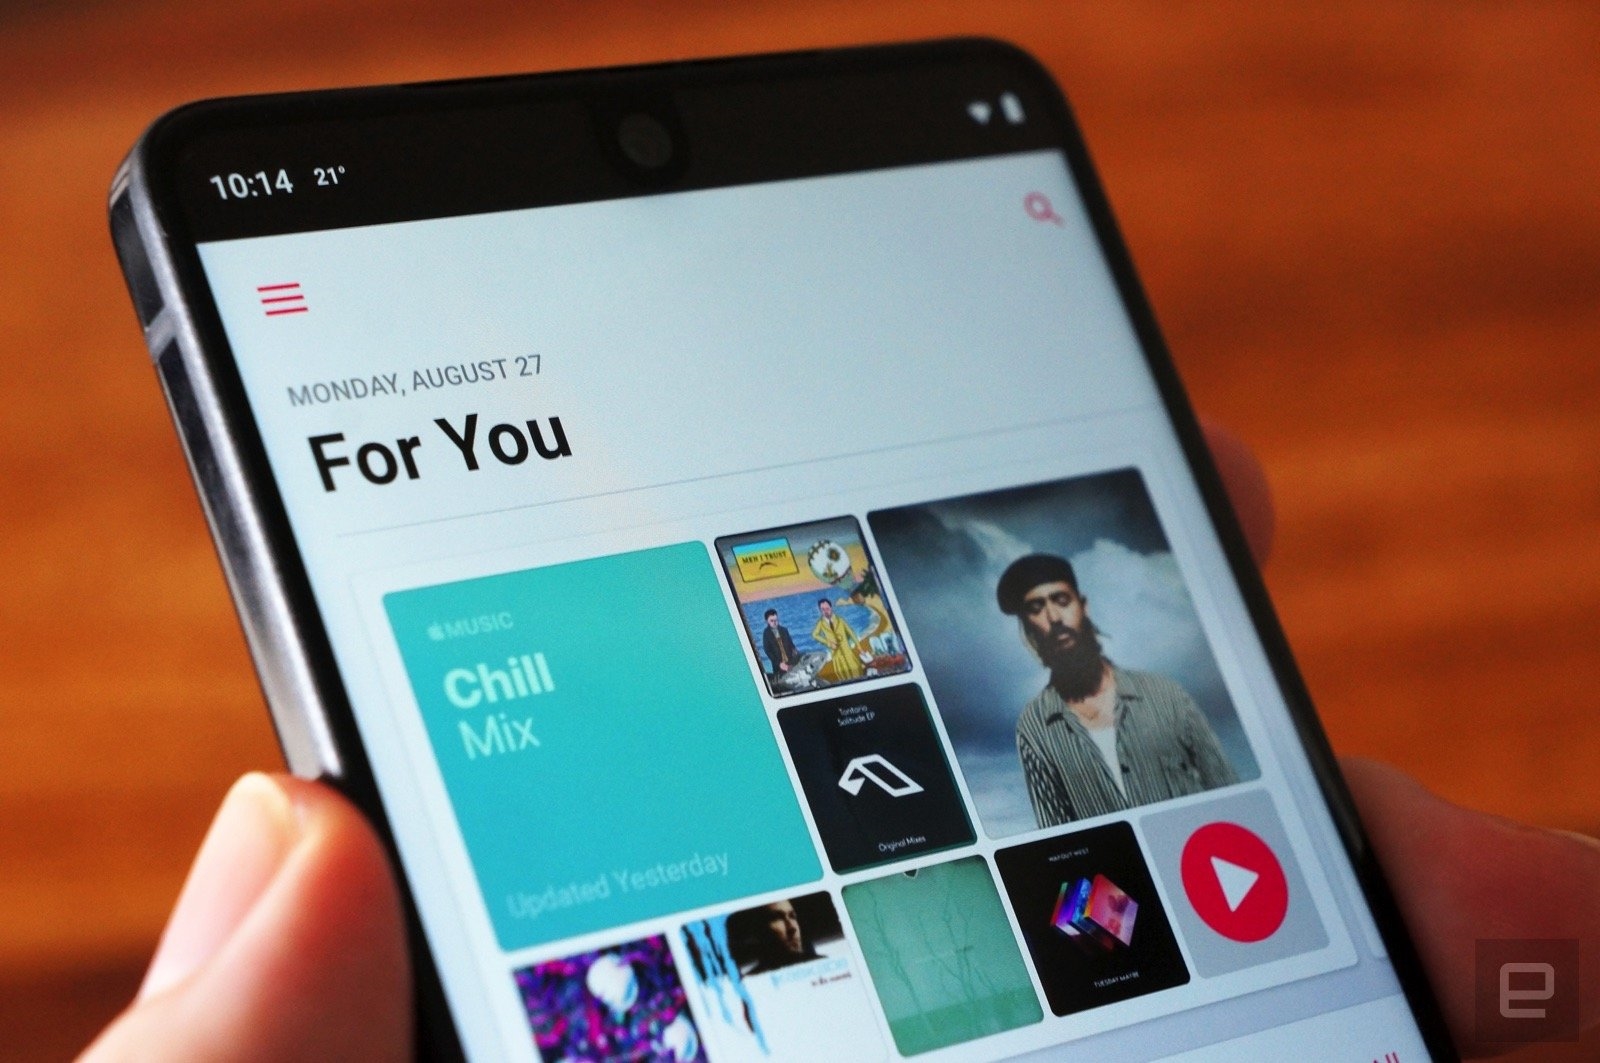 Apple Music code hints at Chromecast support | DeviceDaily.com